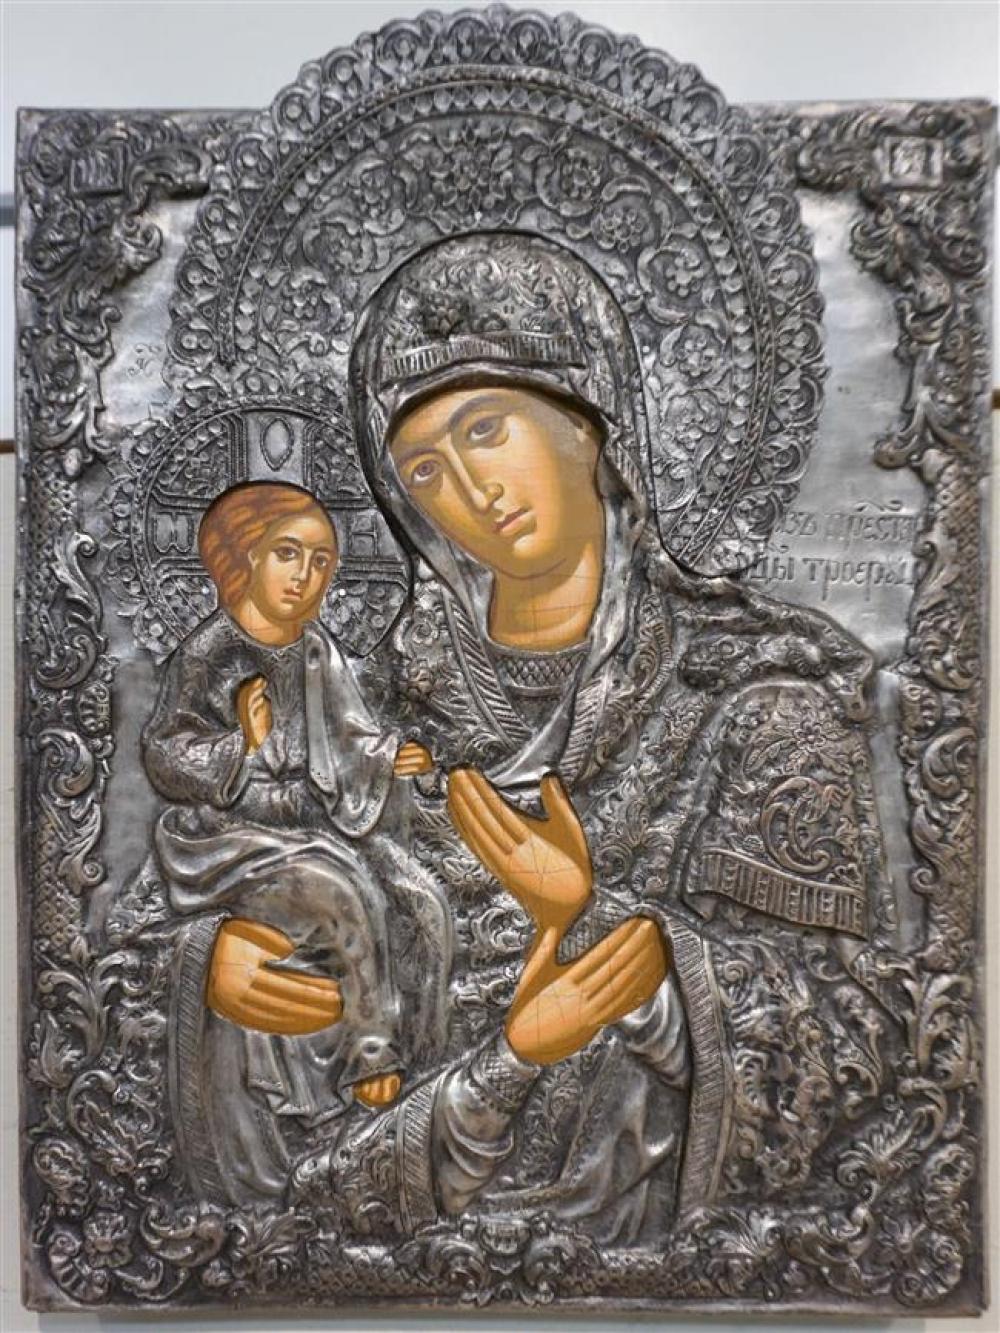 PRINTED ICON OF MADONNA AND CHILD